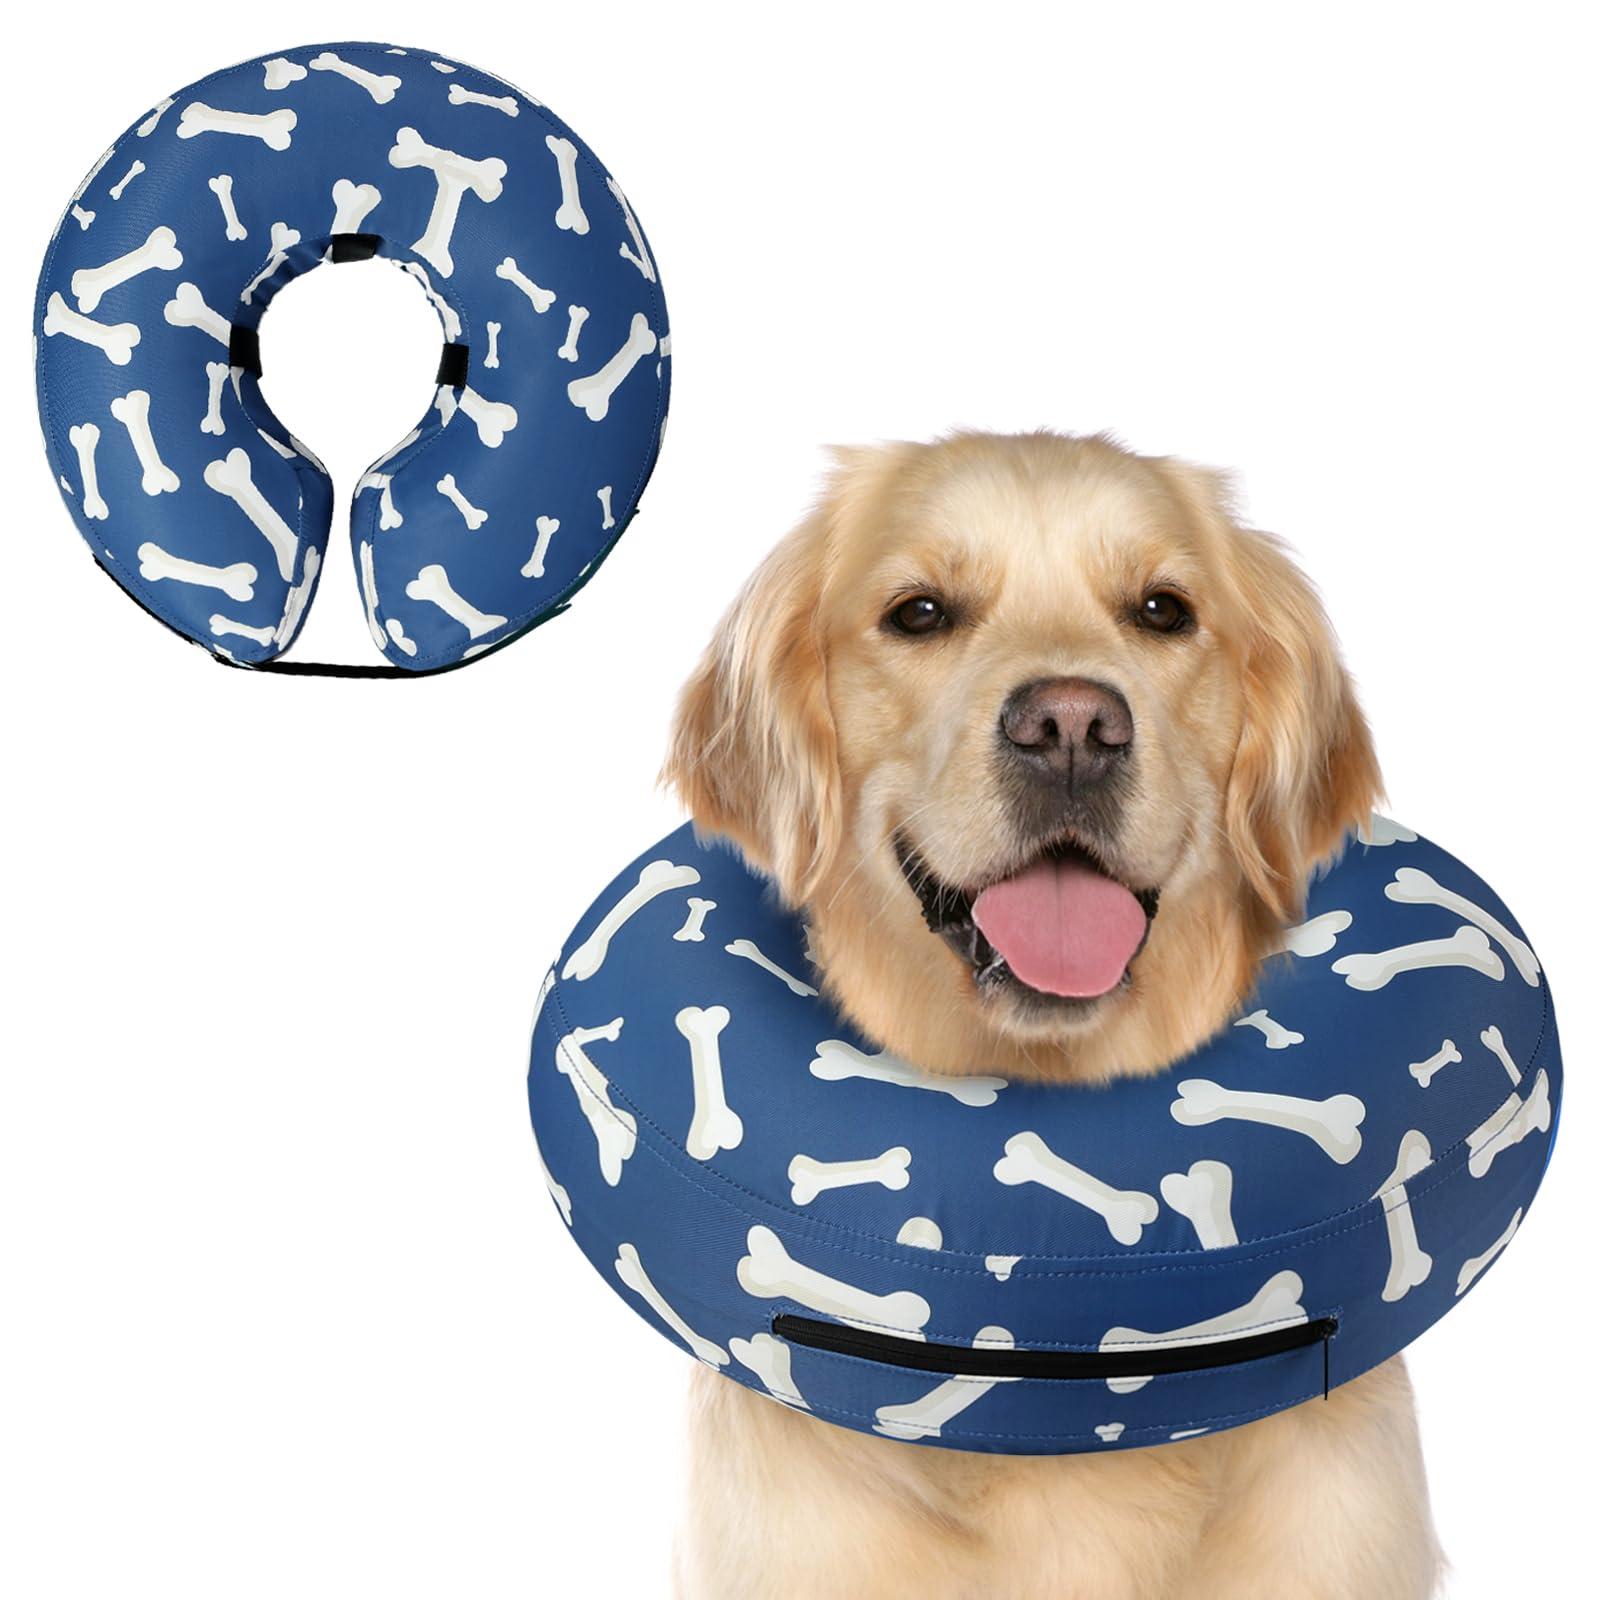 Supet Dog Collar, Inflatable Collar for Dogs and Cats, Alternative After Surgery, Adjustable, Comfortable Protective Collar for Pets (Blue Bone, L)